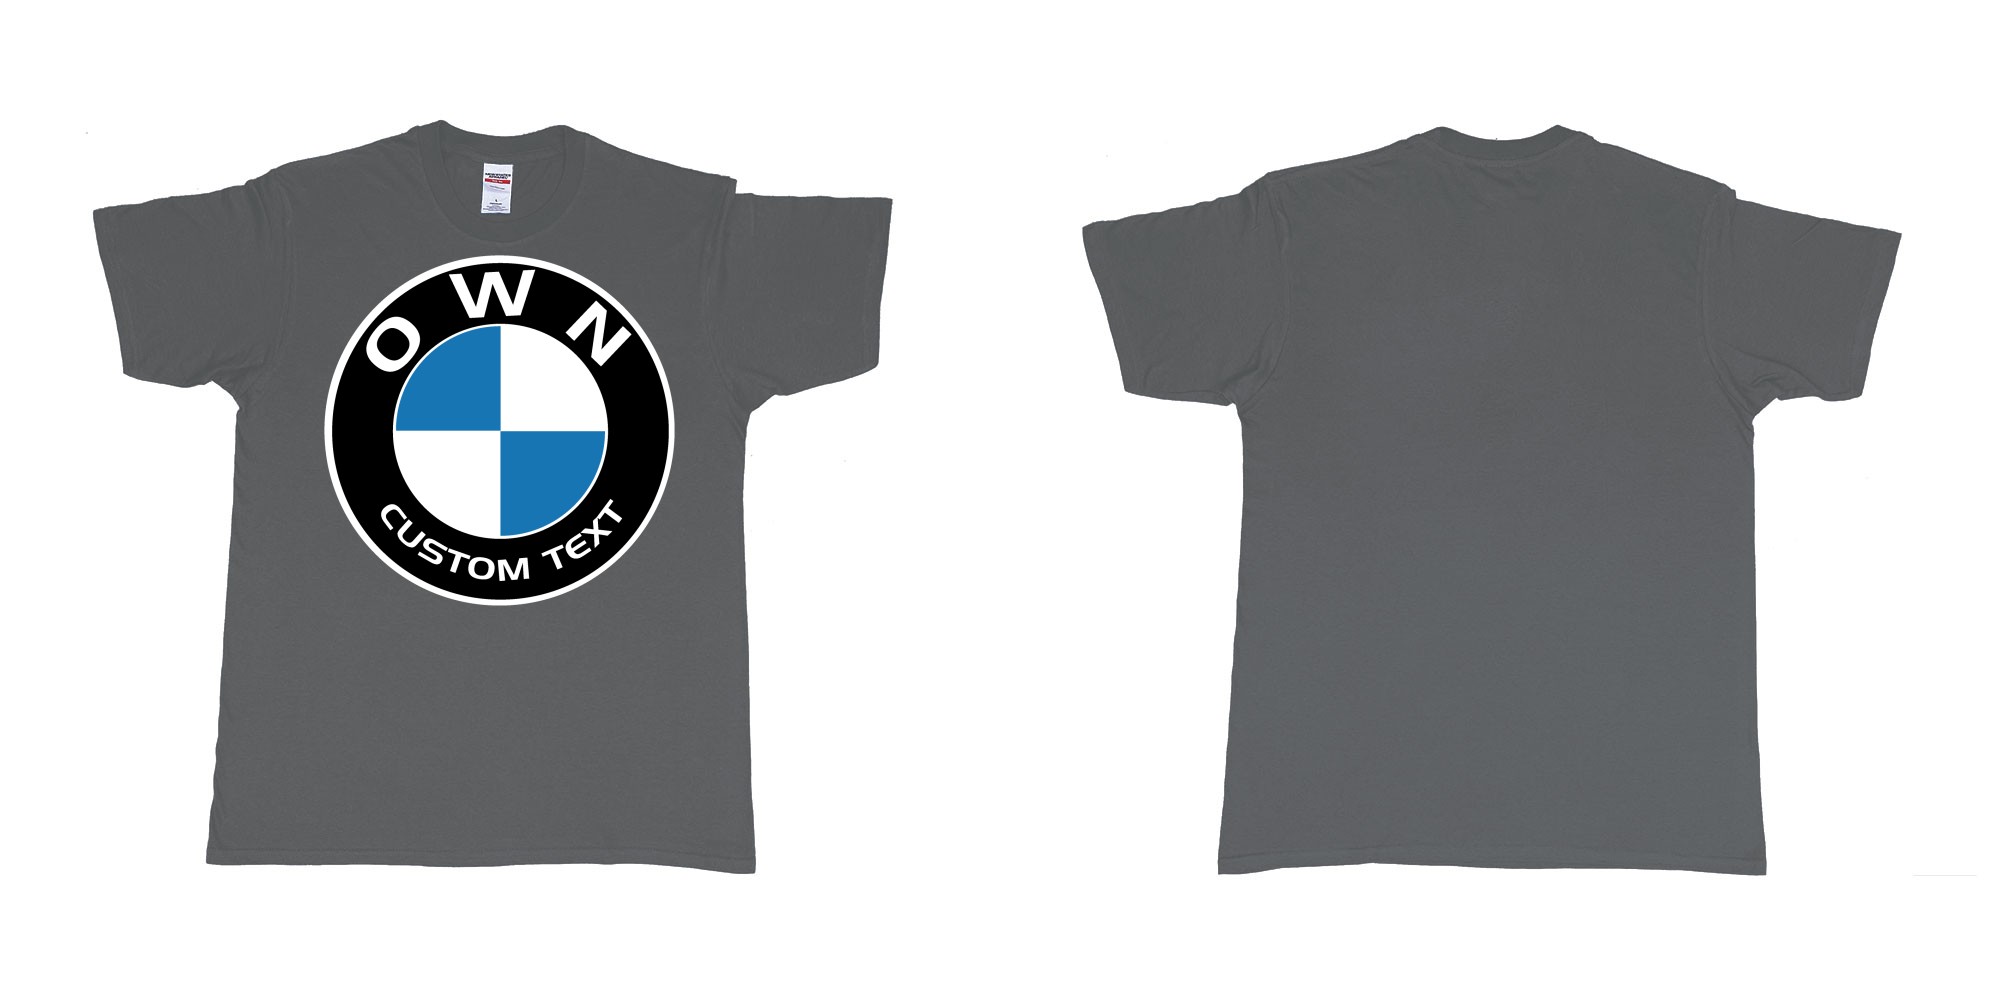 Custom tshirt design BMW logo custom text tshirt printing in fabric color charcoal choice your own text made in Bali by The Pirate Way